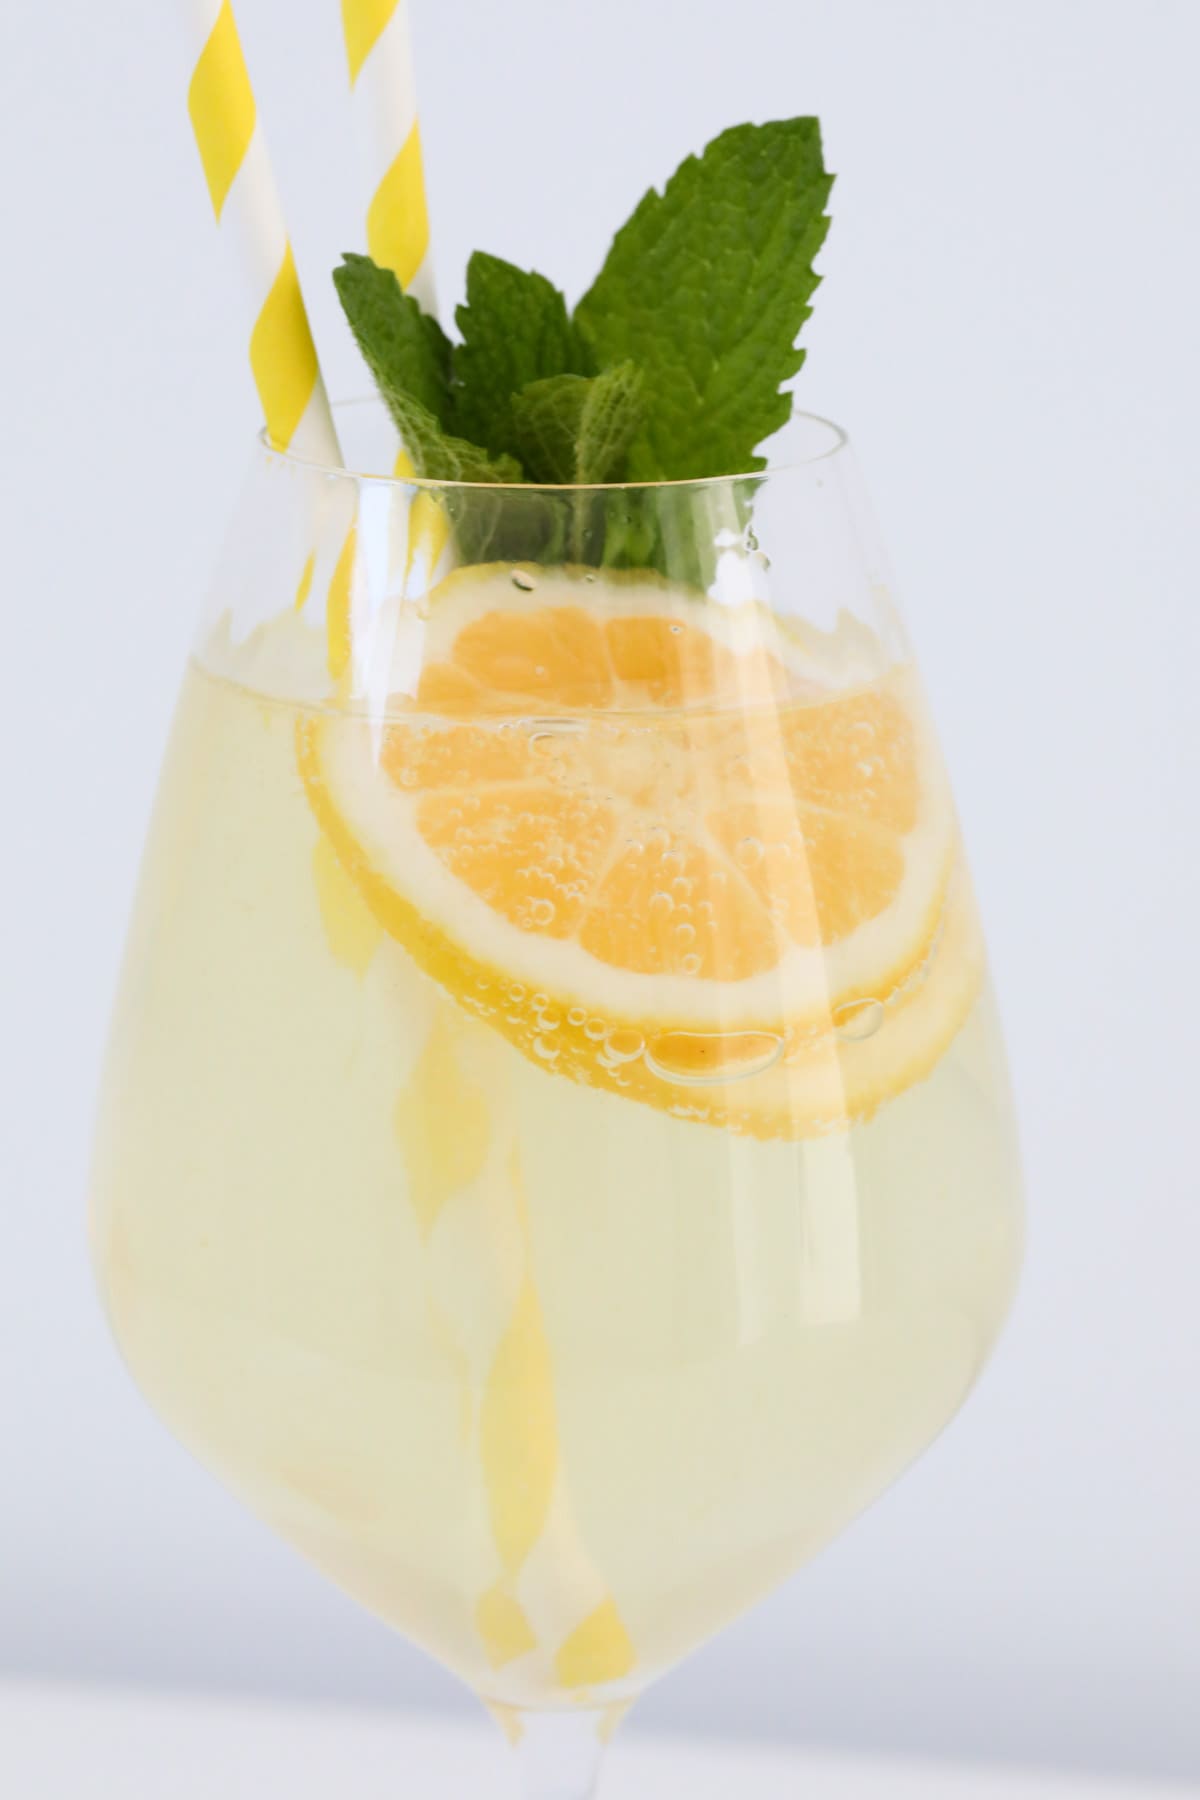 Side view of a glass of chilled limoncello spritz with slices of lemon added and a sprig of fresh mint.